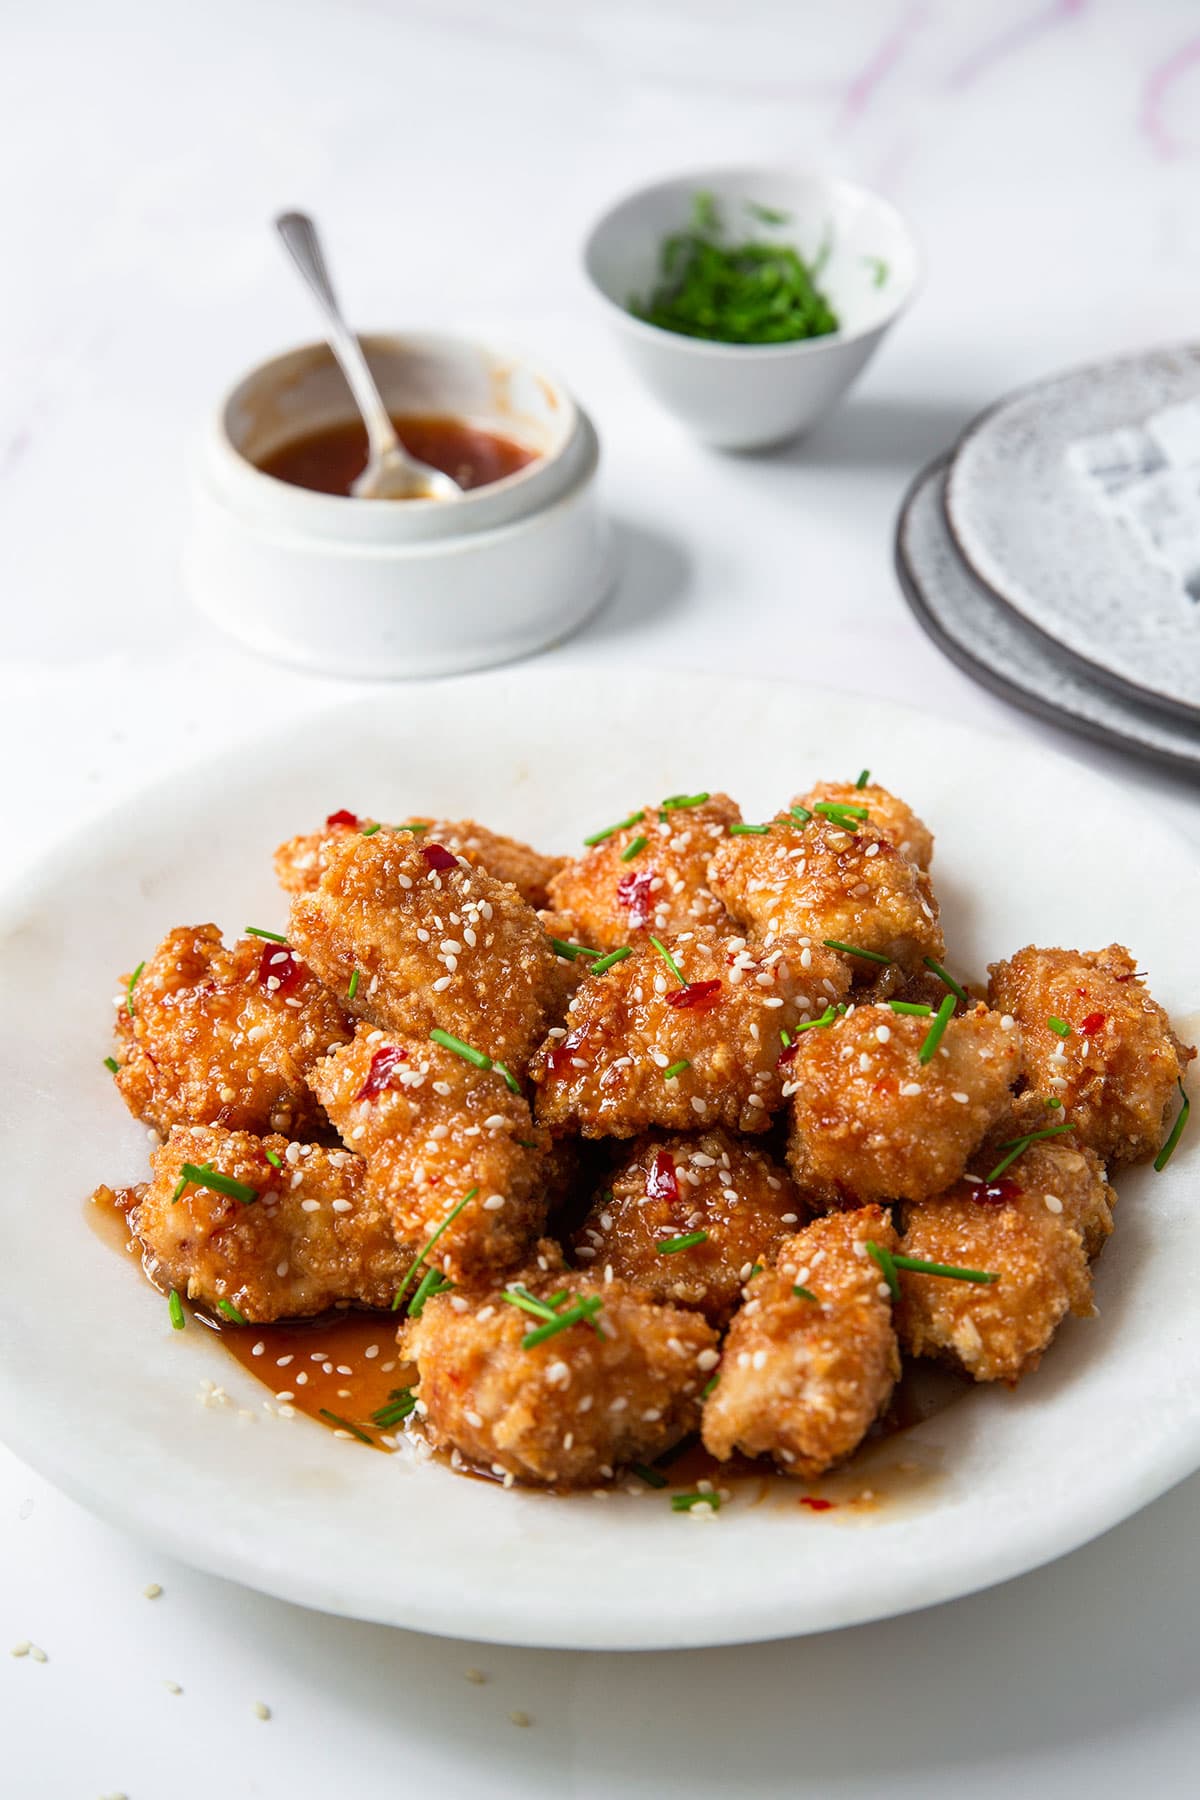 Easy and quick crispy panko-crusted baked chicken nuggets with a sweet and savory honey garlic sauce in a plate.